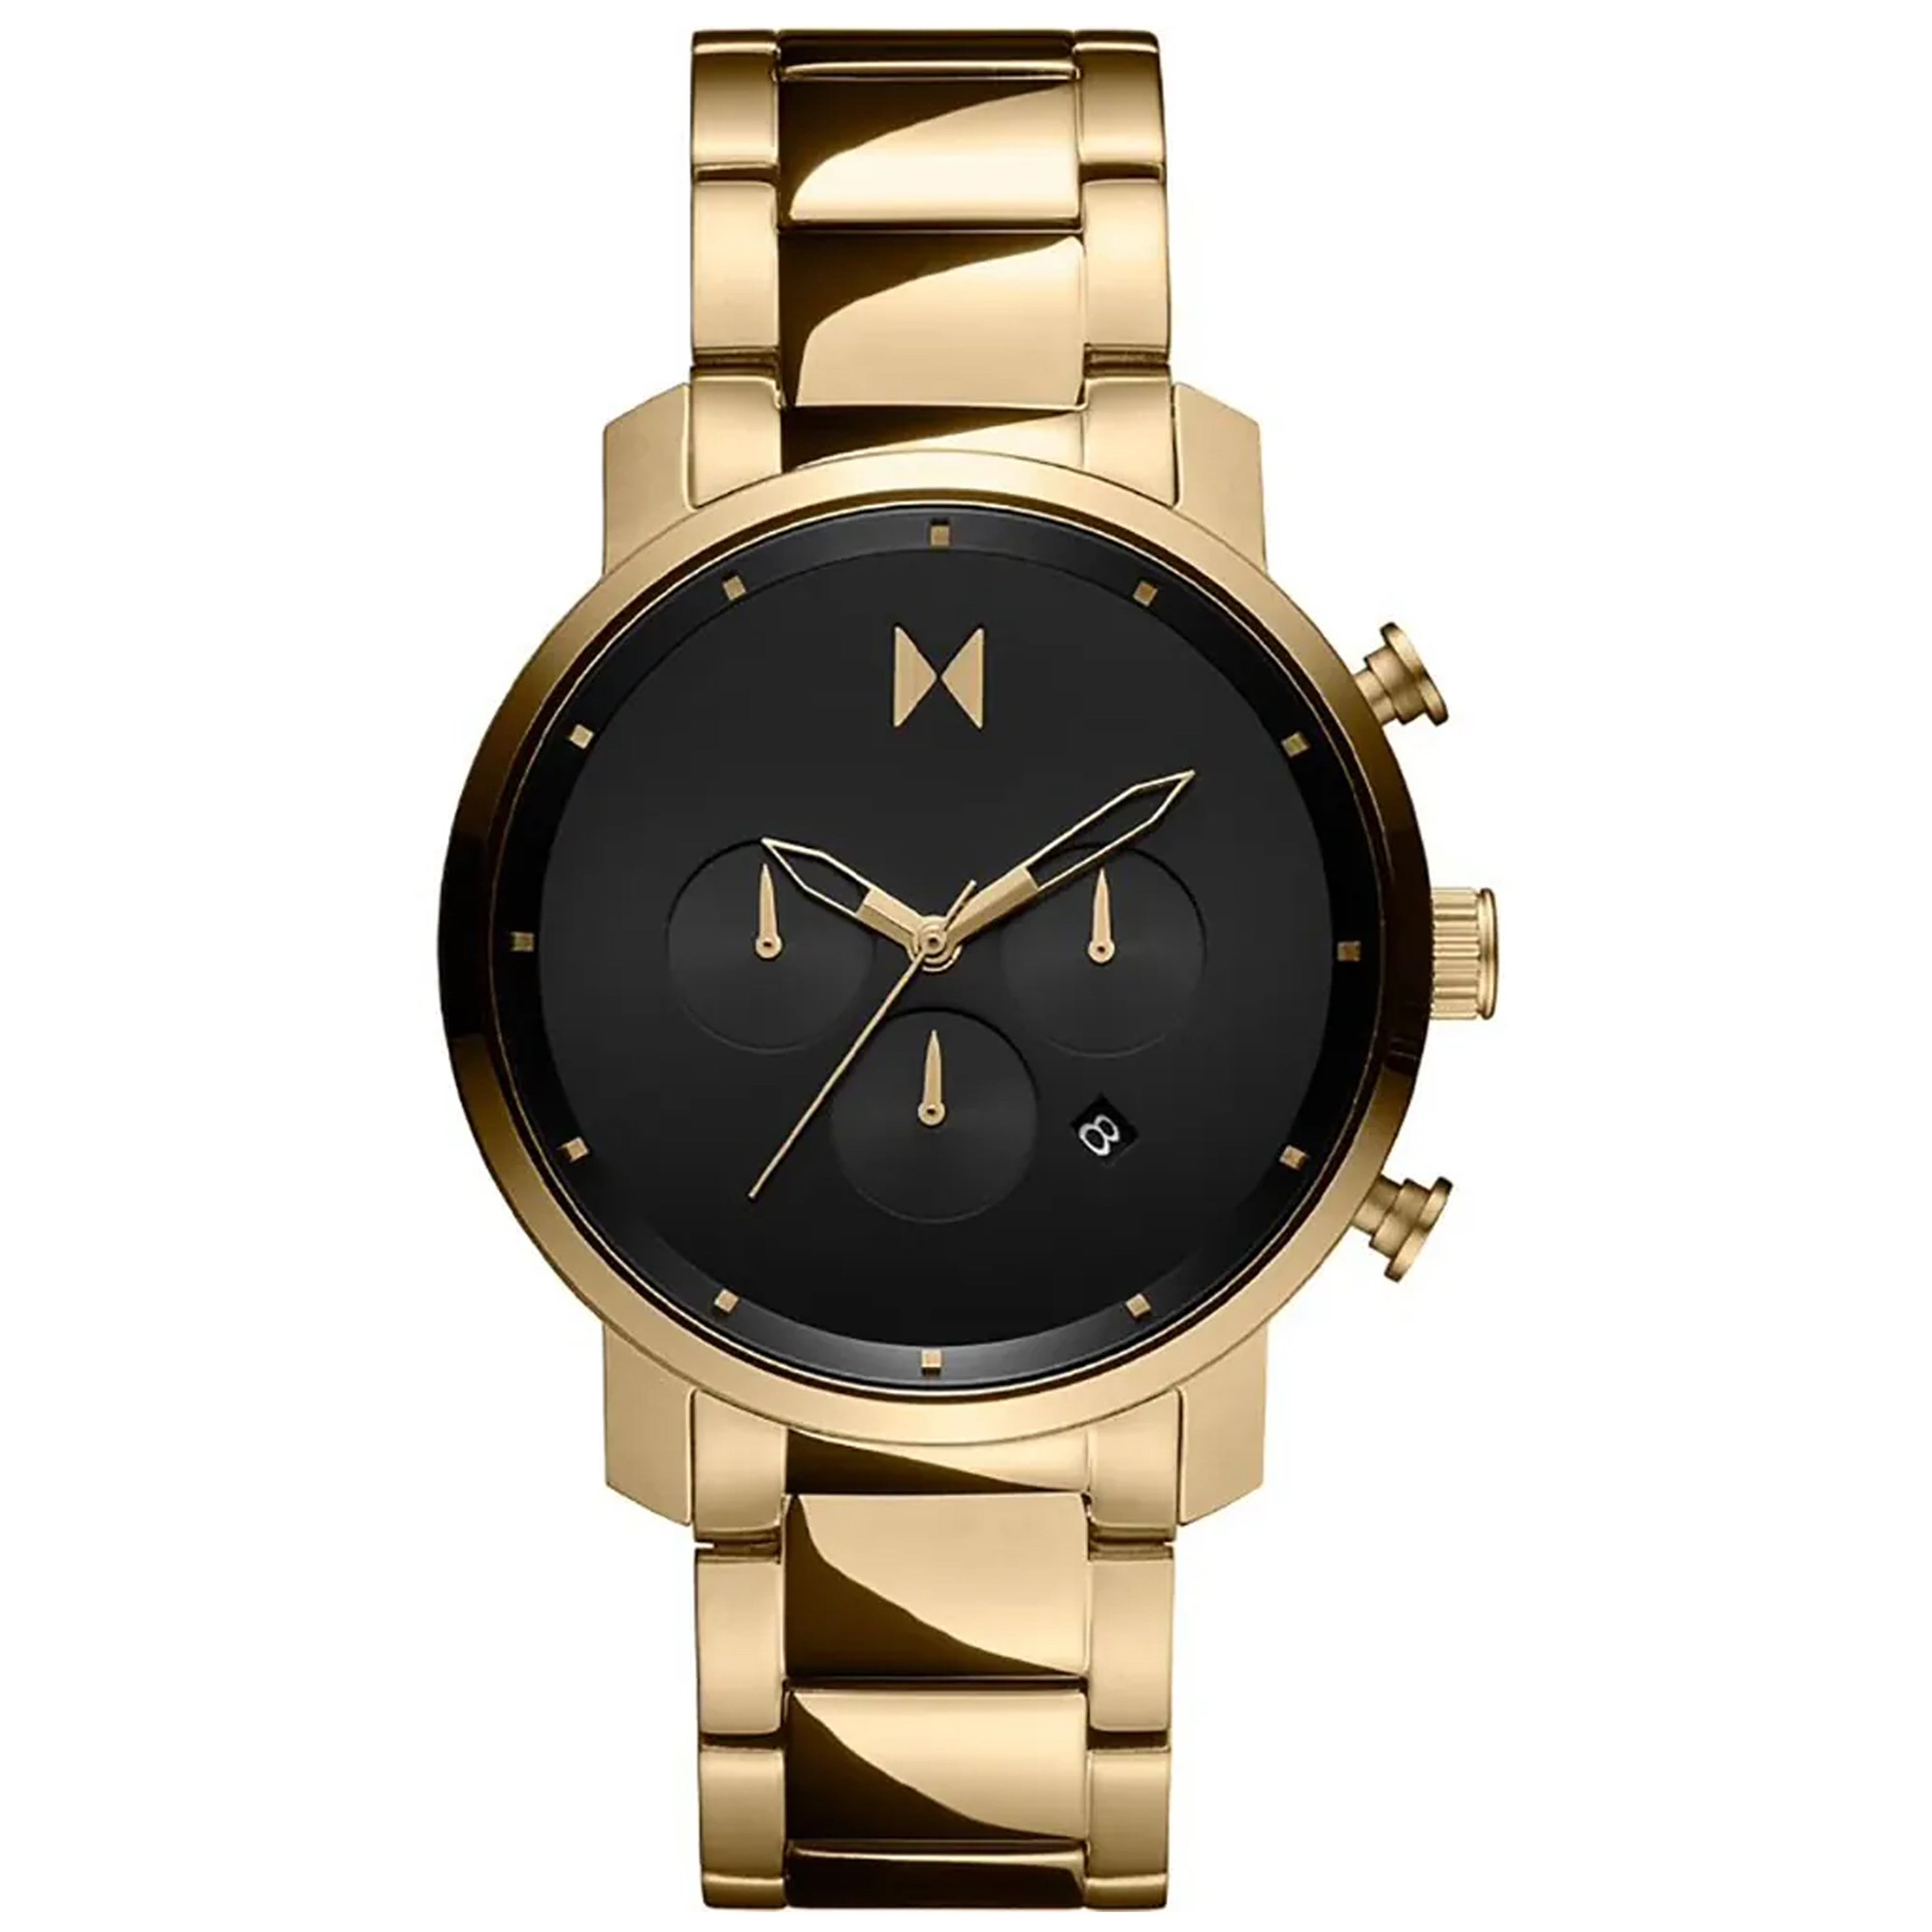 Mens Chrono Gold-Tone Stainless Steel Watch Black Dial